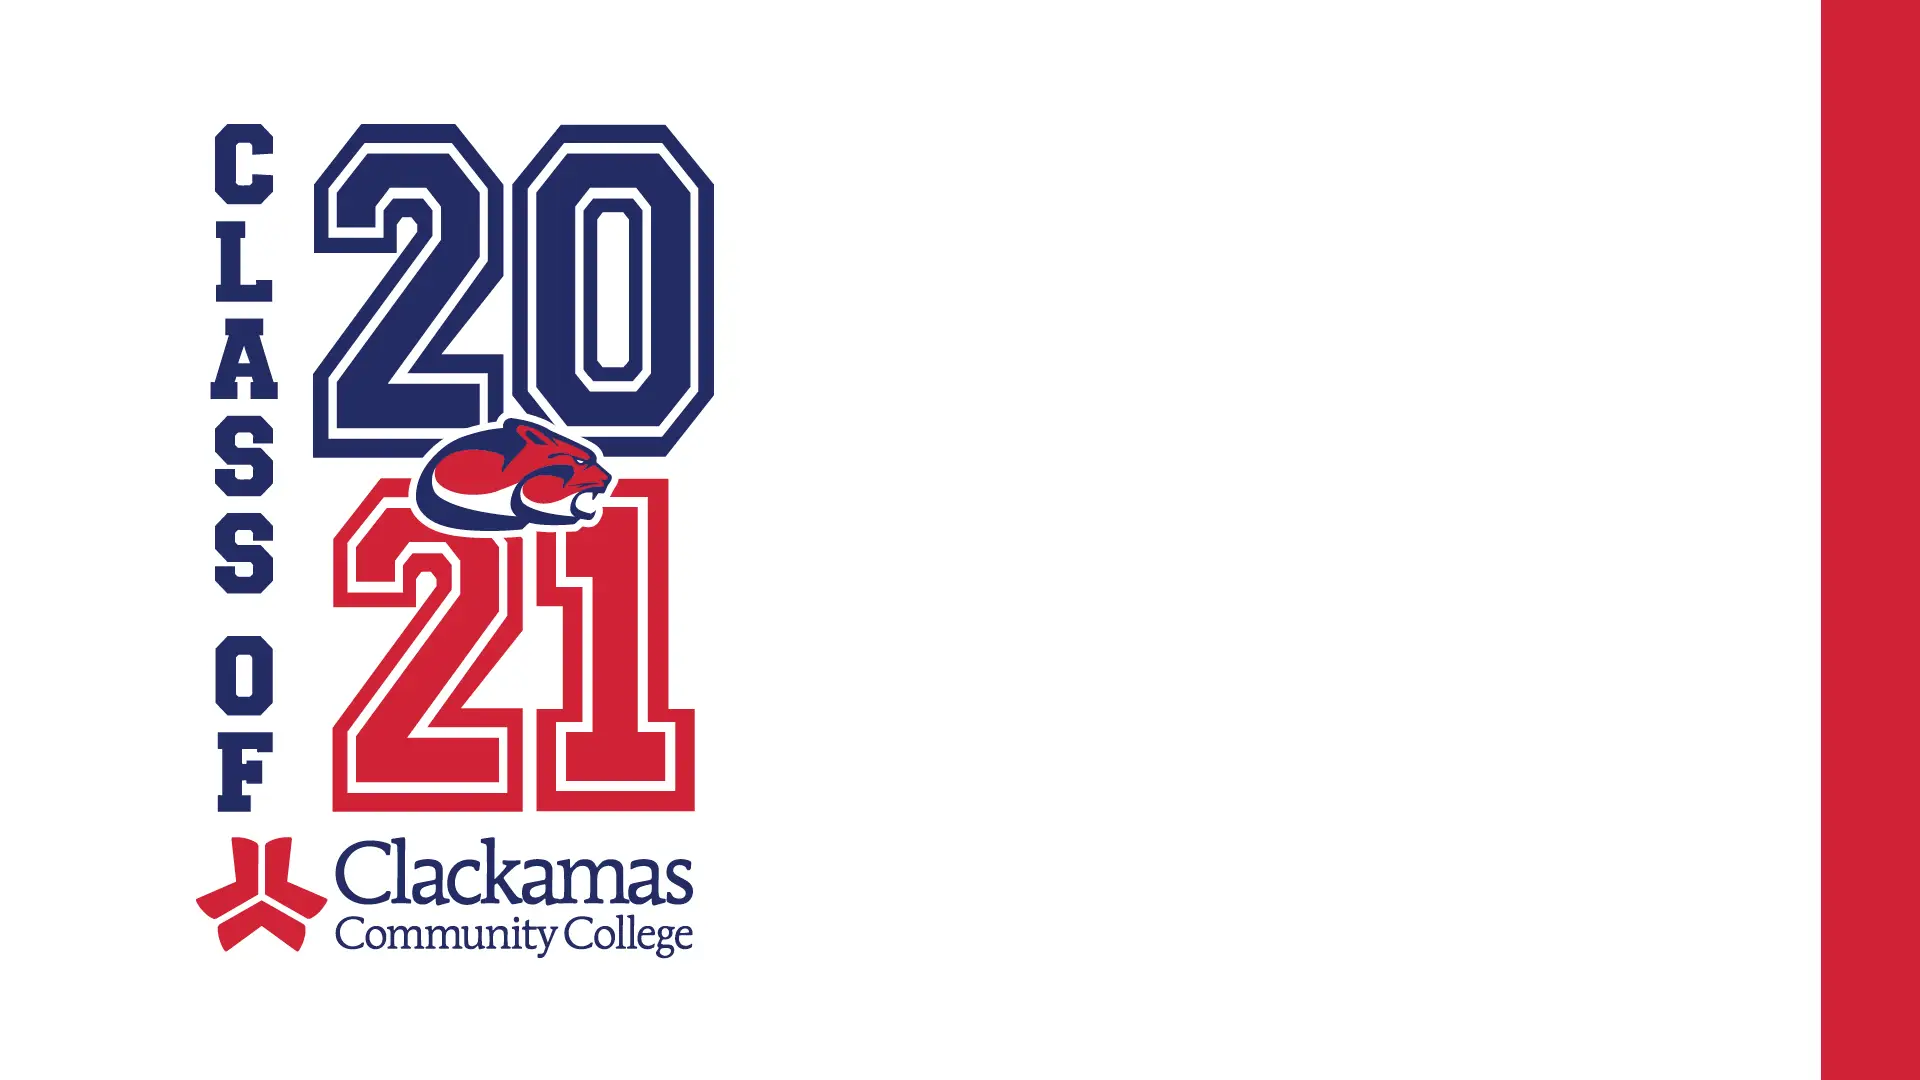 Zoom background with white background, red and blue Class of 2021 text and red vertical banner on the right